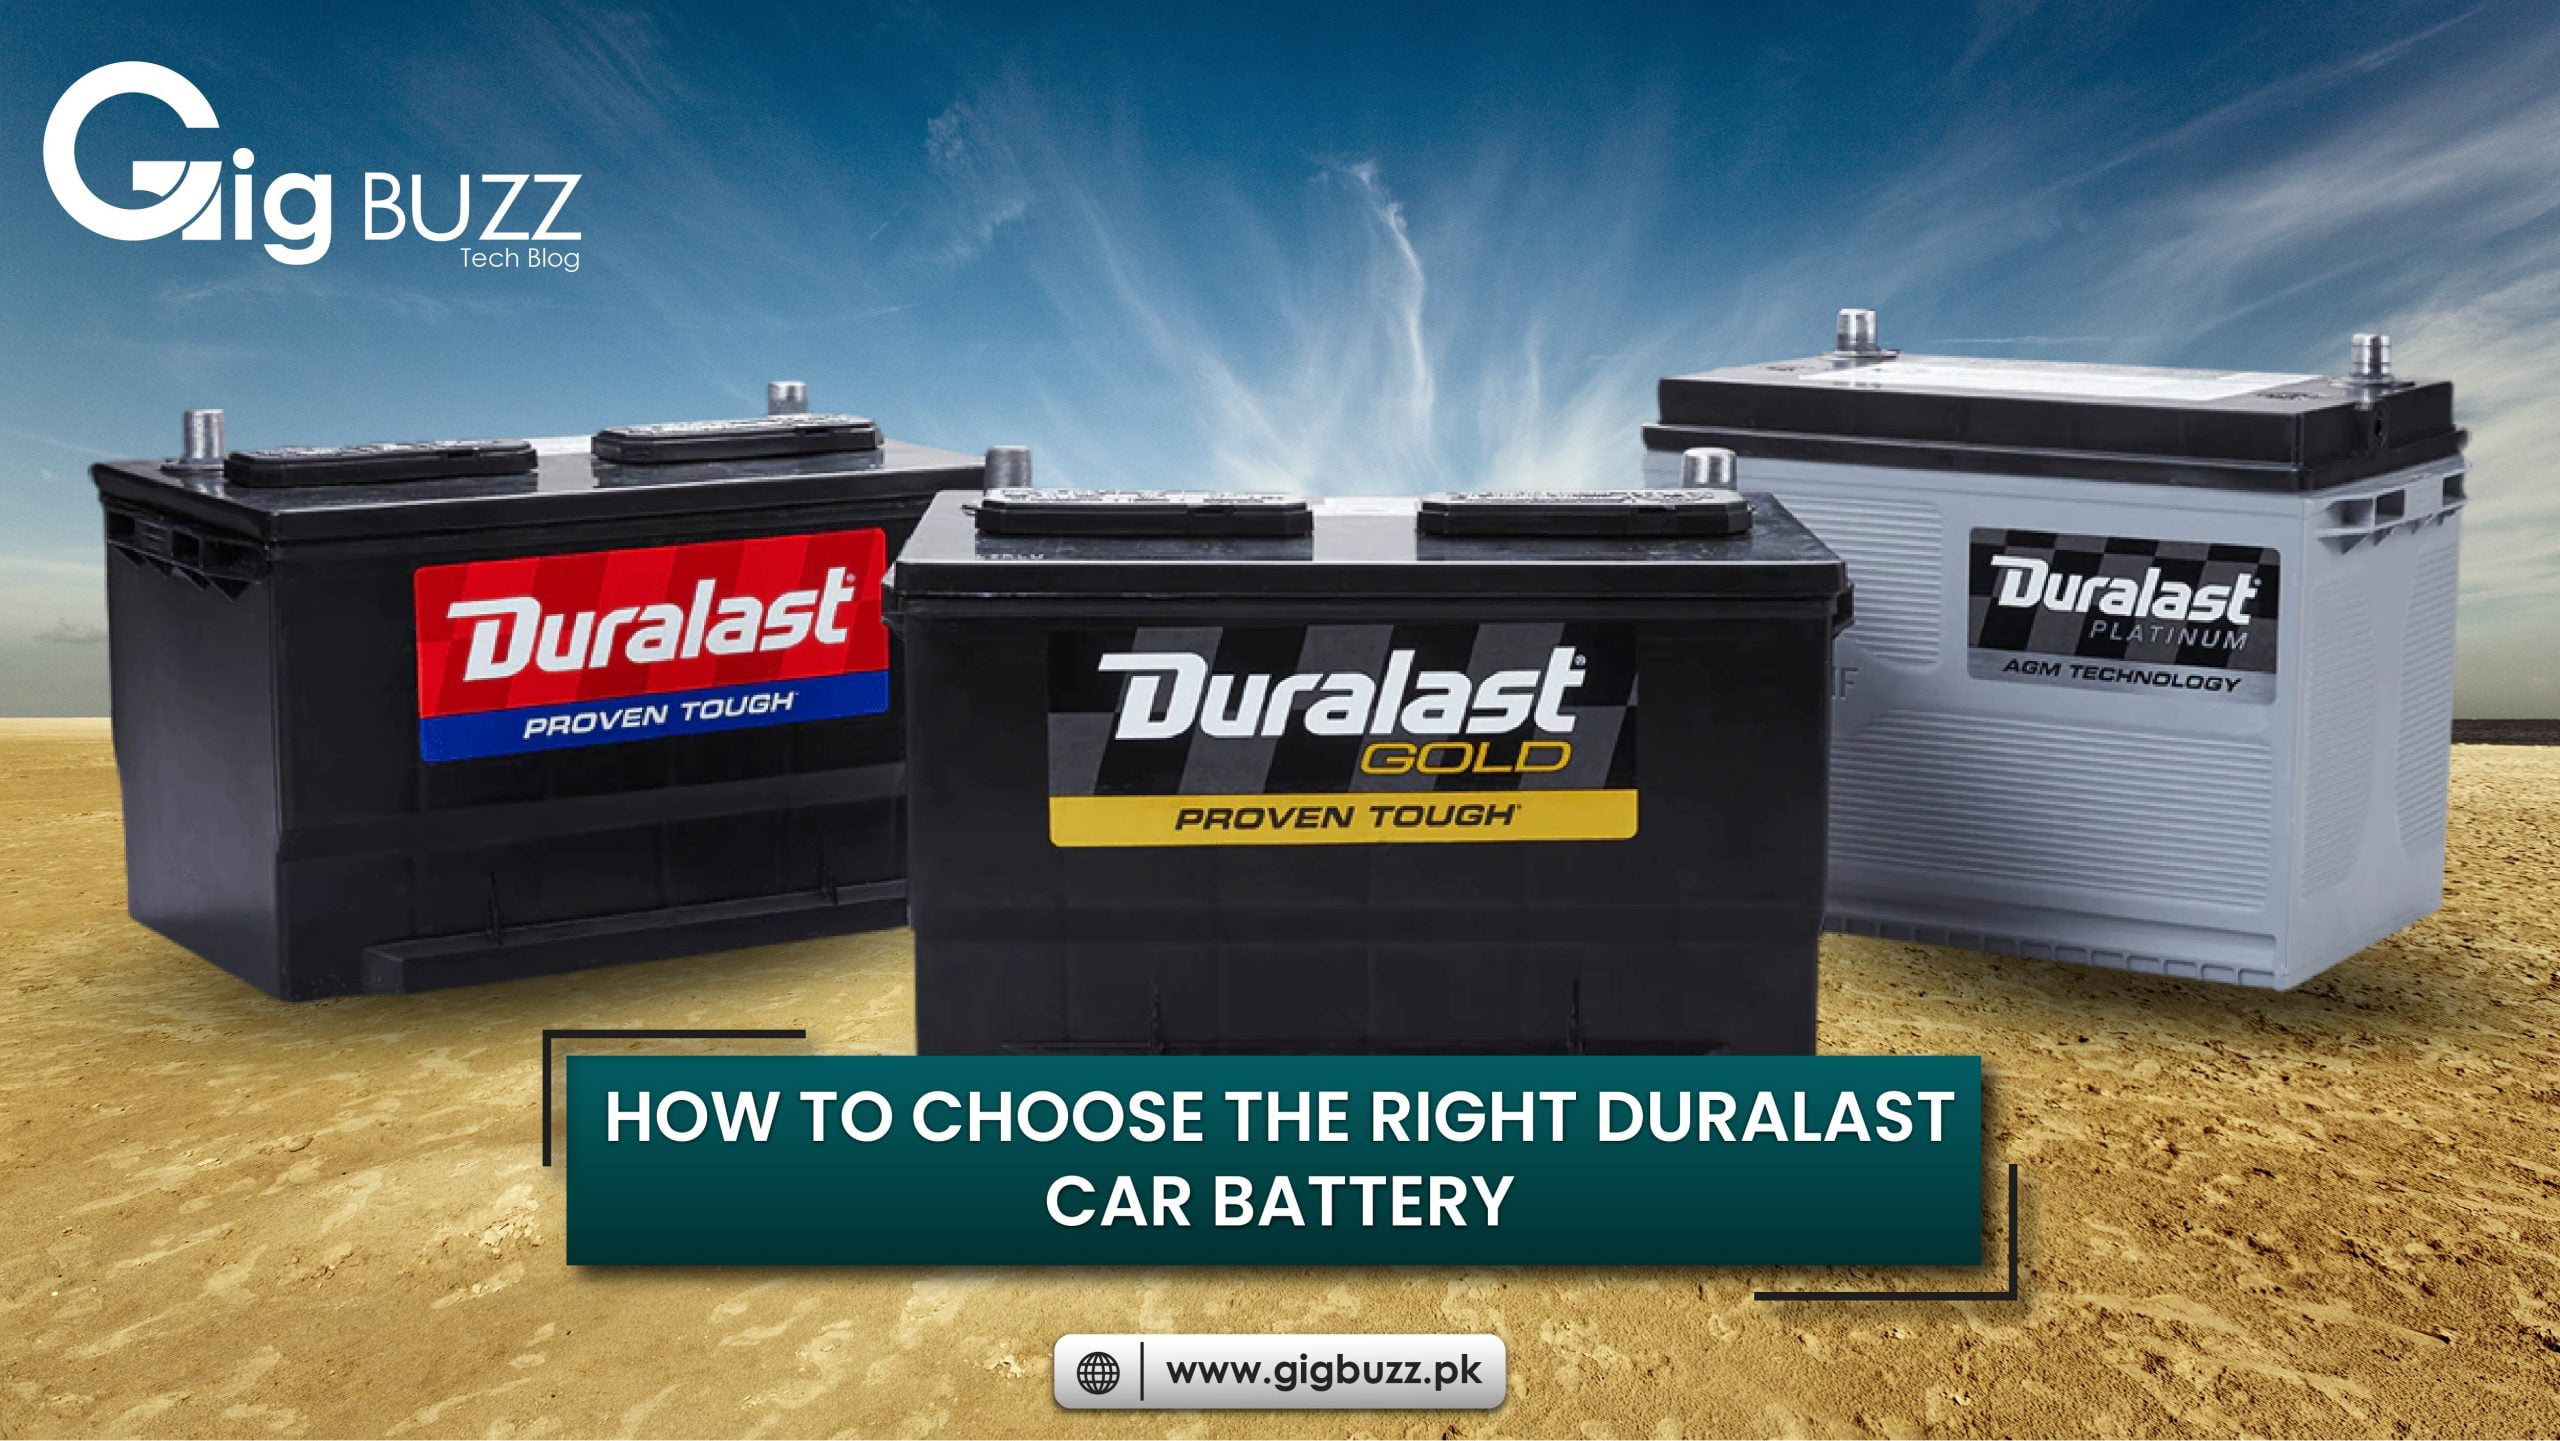 How Right Duralast Car Battery?